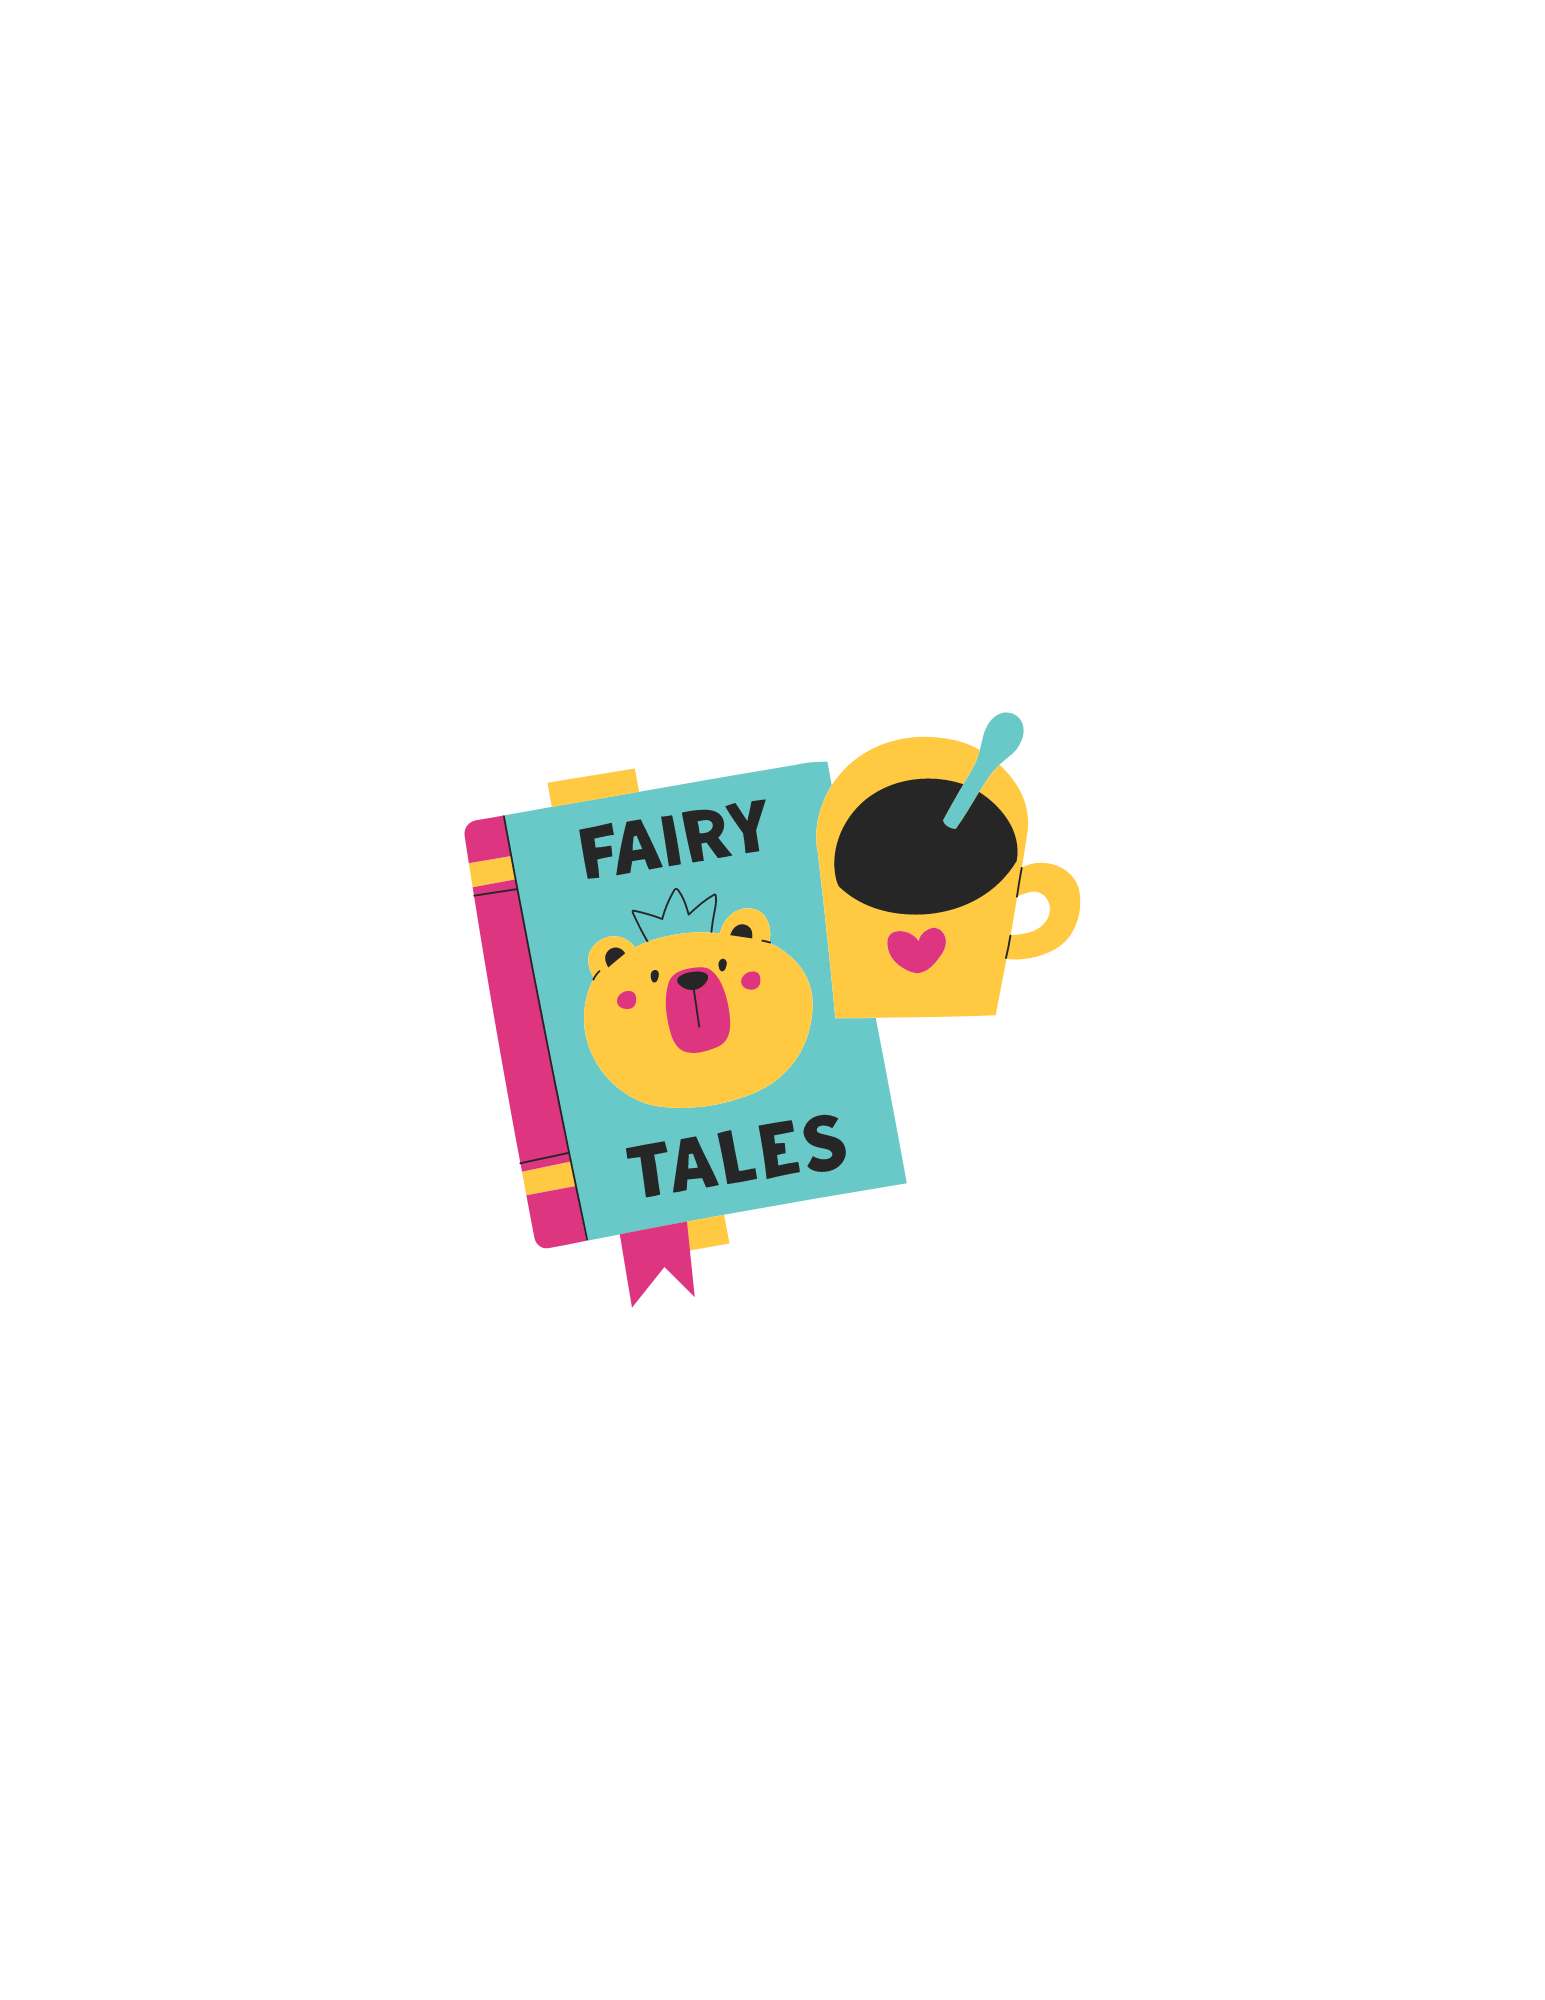 Book of fairy tales and cup of tea